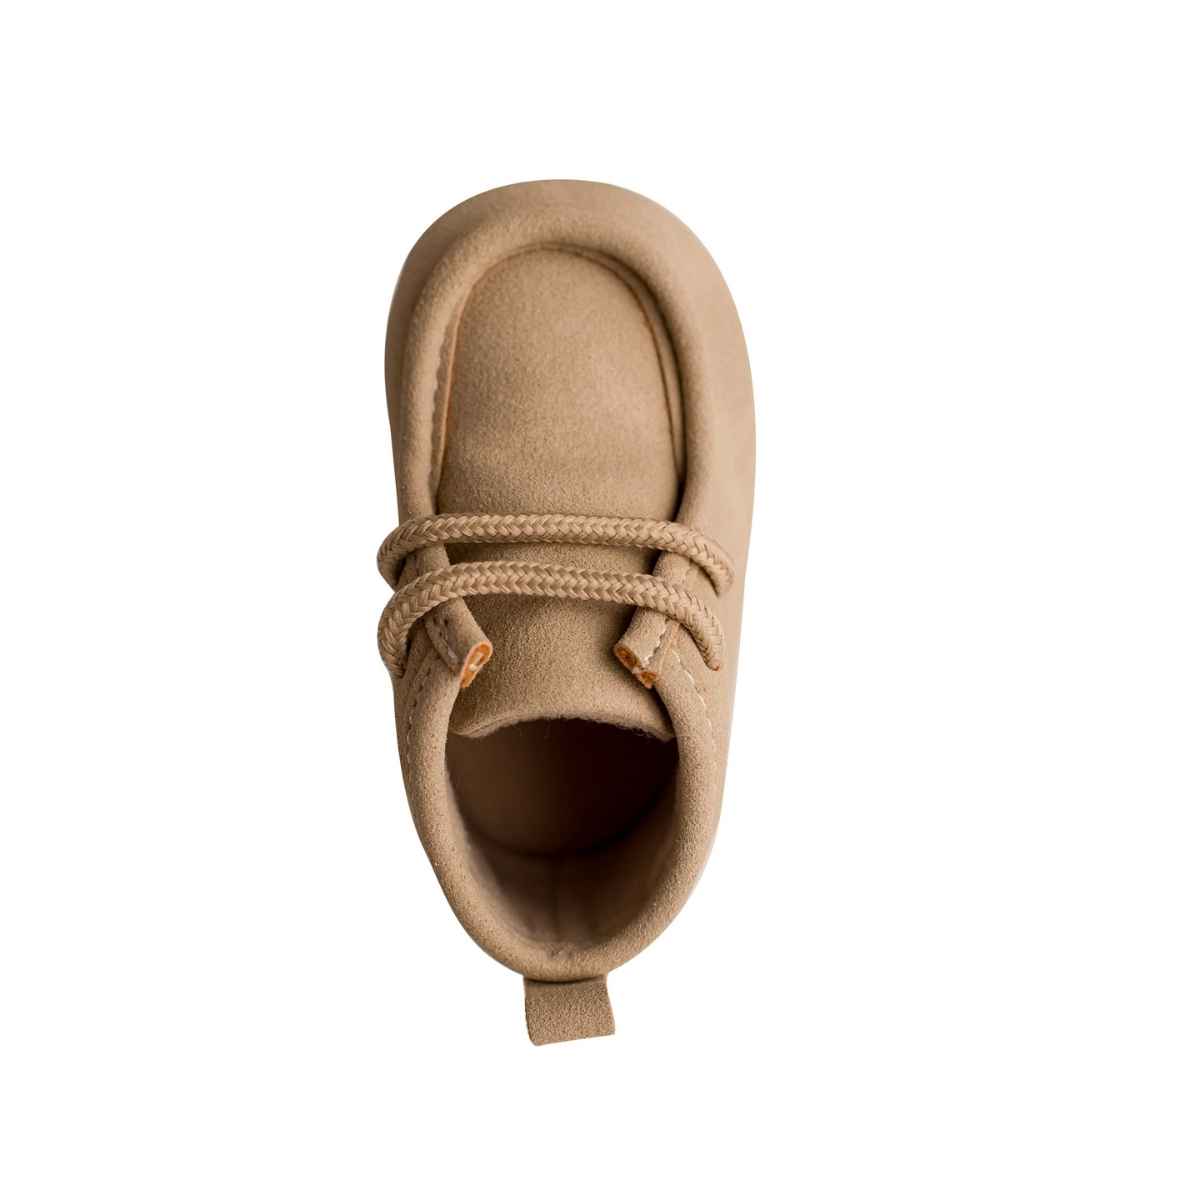 Wally Infant Soft Sole Wallabee Booties | Tan